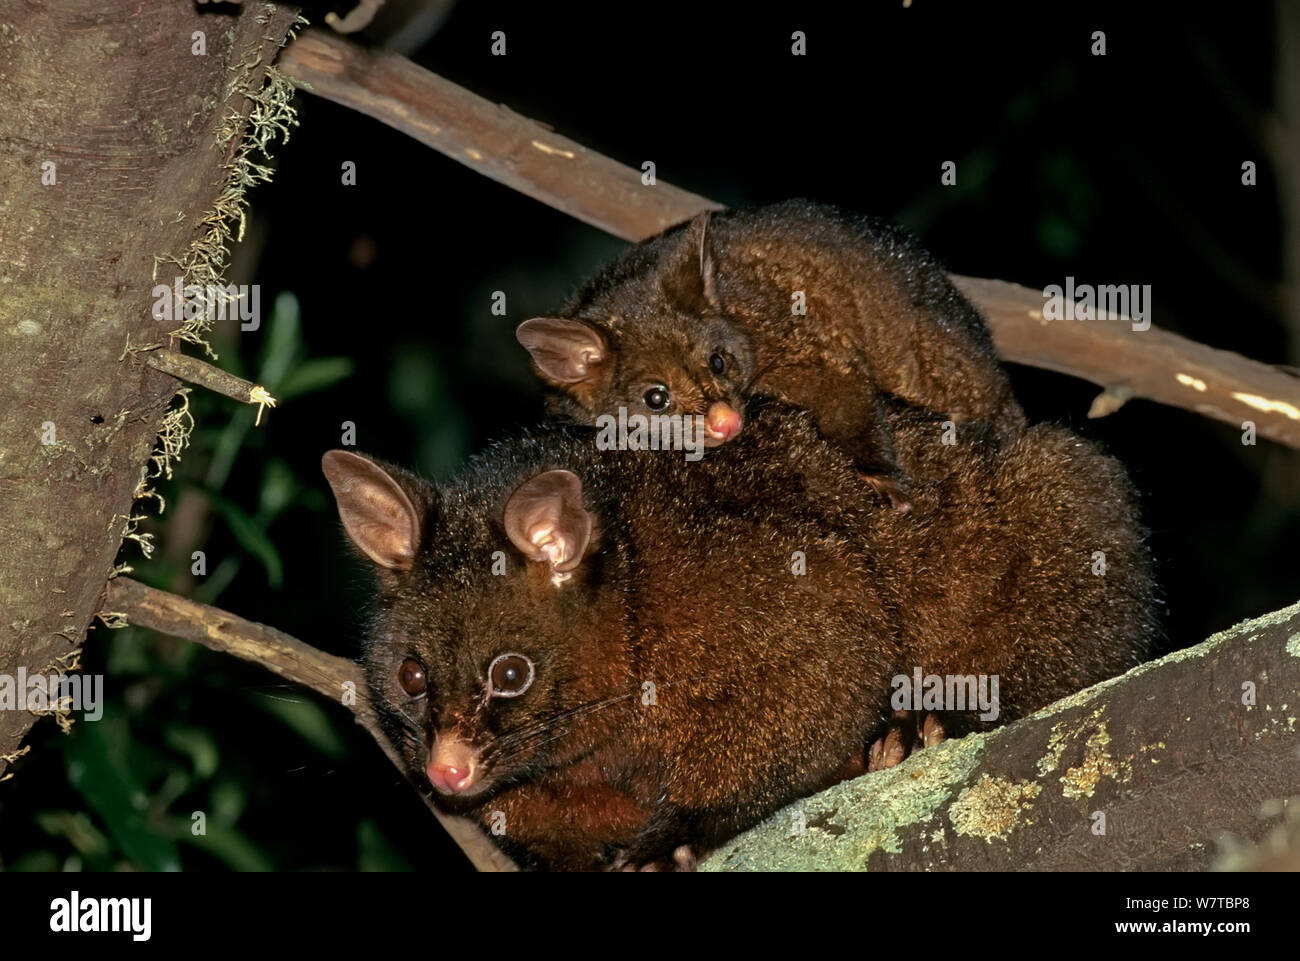 Australian Brush-tailed Possum (Trichosurus vulpecula) invasive species,  adult with young perched on back. Golden Bay, South Island, New Zealand. Stock Photo